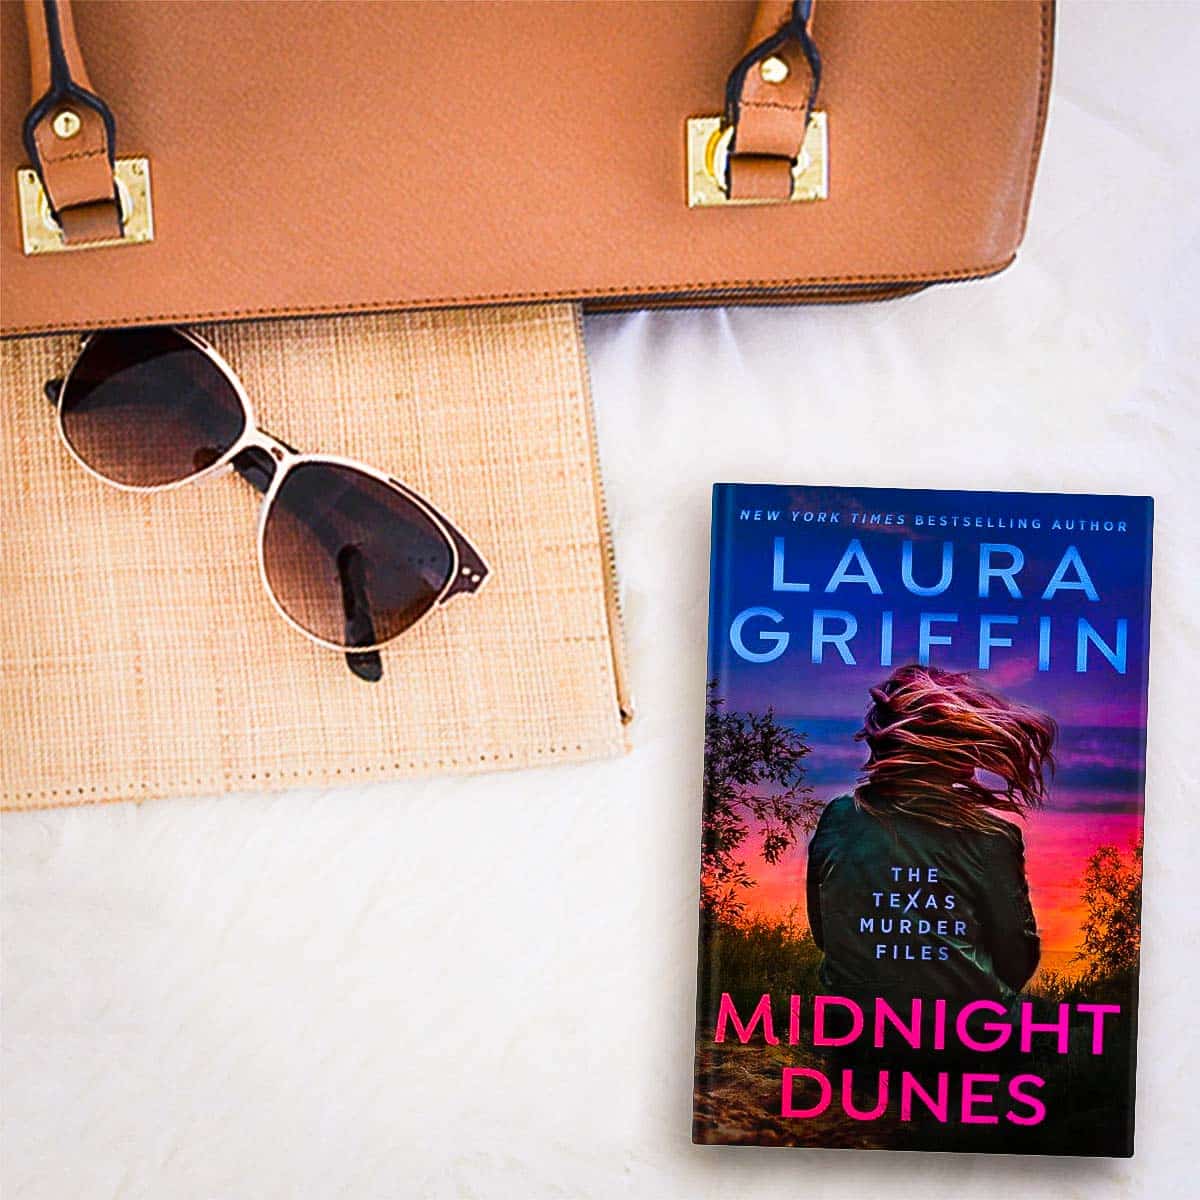 Midnight Dunes by Laura Griffin is the third book in the Texas Murder Files series and is a fast-paced murder mystery and romantic suspense that is full of action and twists that will keep you flipping pages until the end!